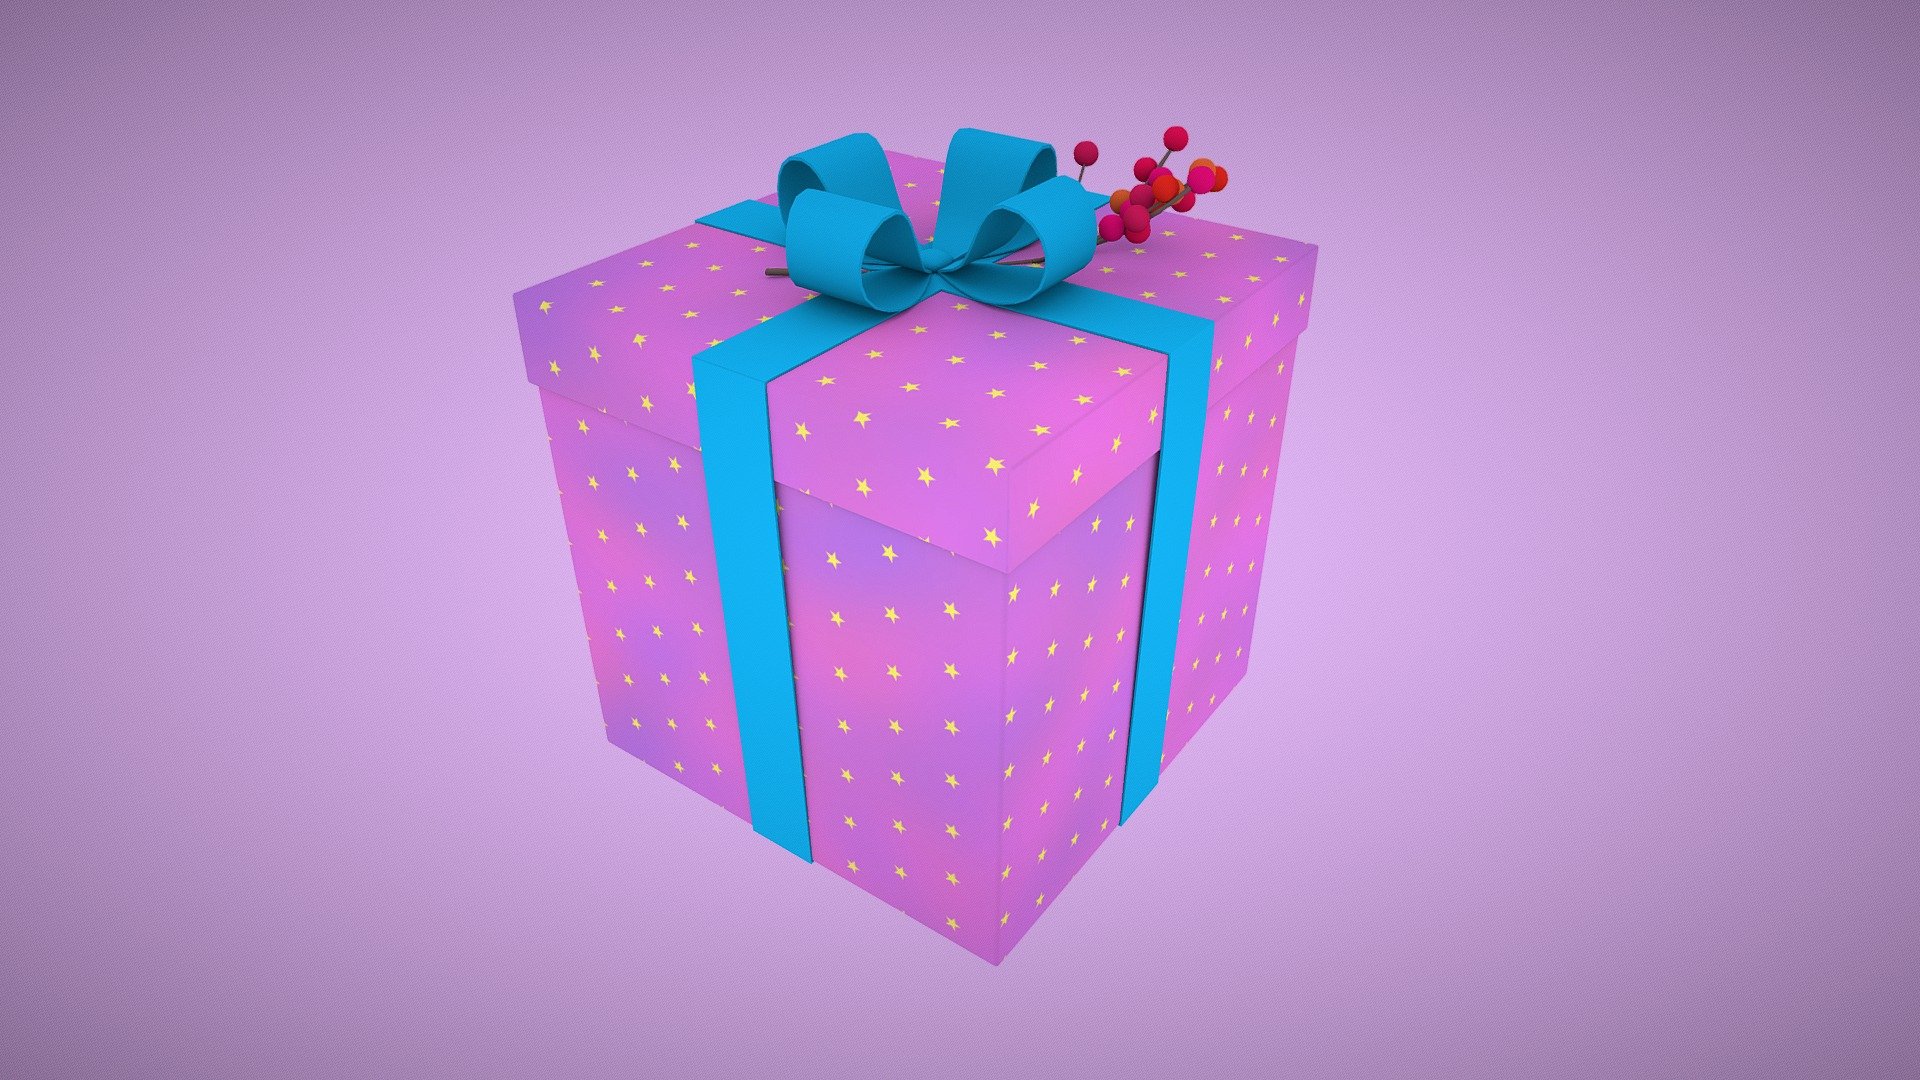 My entry for day 19th of the 3December Challenge

Just a simple gift box with bright ribbon and colorful berries 3d model